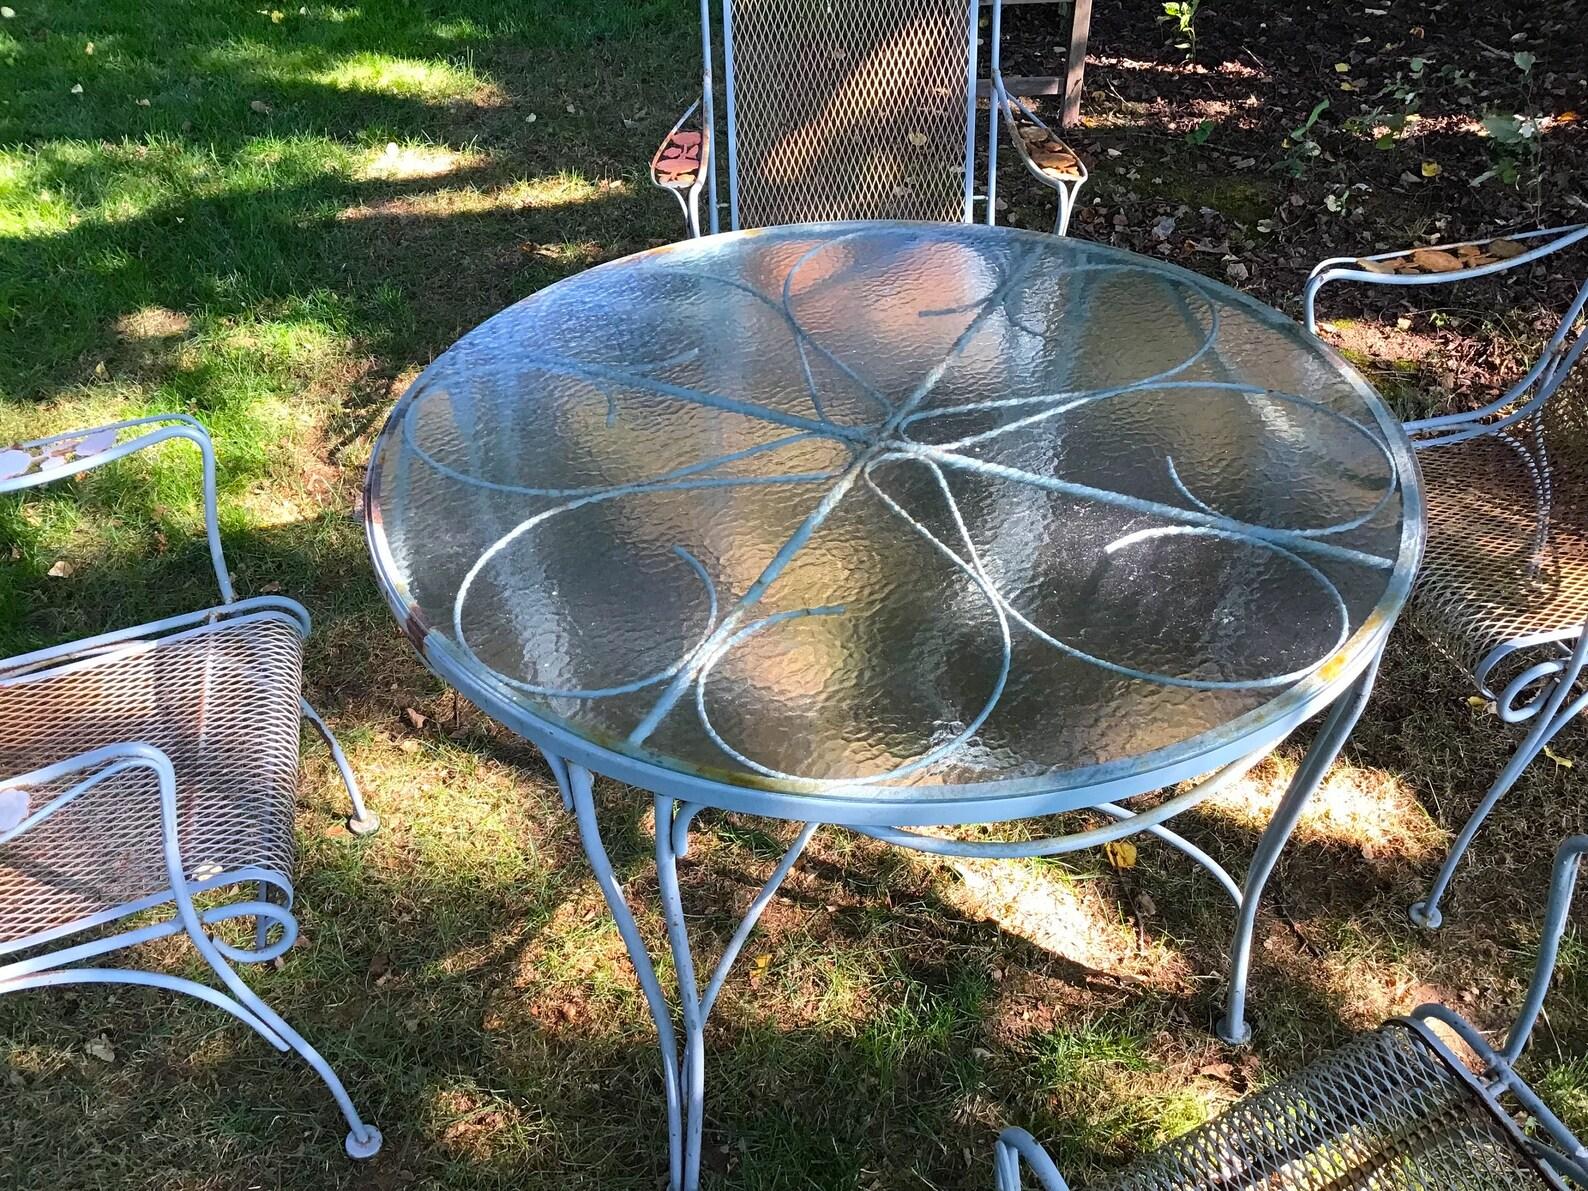 Mid century iron garden furniture, outdoor furniture set,
vintage patio set, iron patio furniture, in Russell Woodard or Salterini style.
I haven't found the exact pattern match, but I'm guessing its either Woodard, Salterini, or Lyon-Shaw.
The